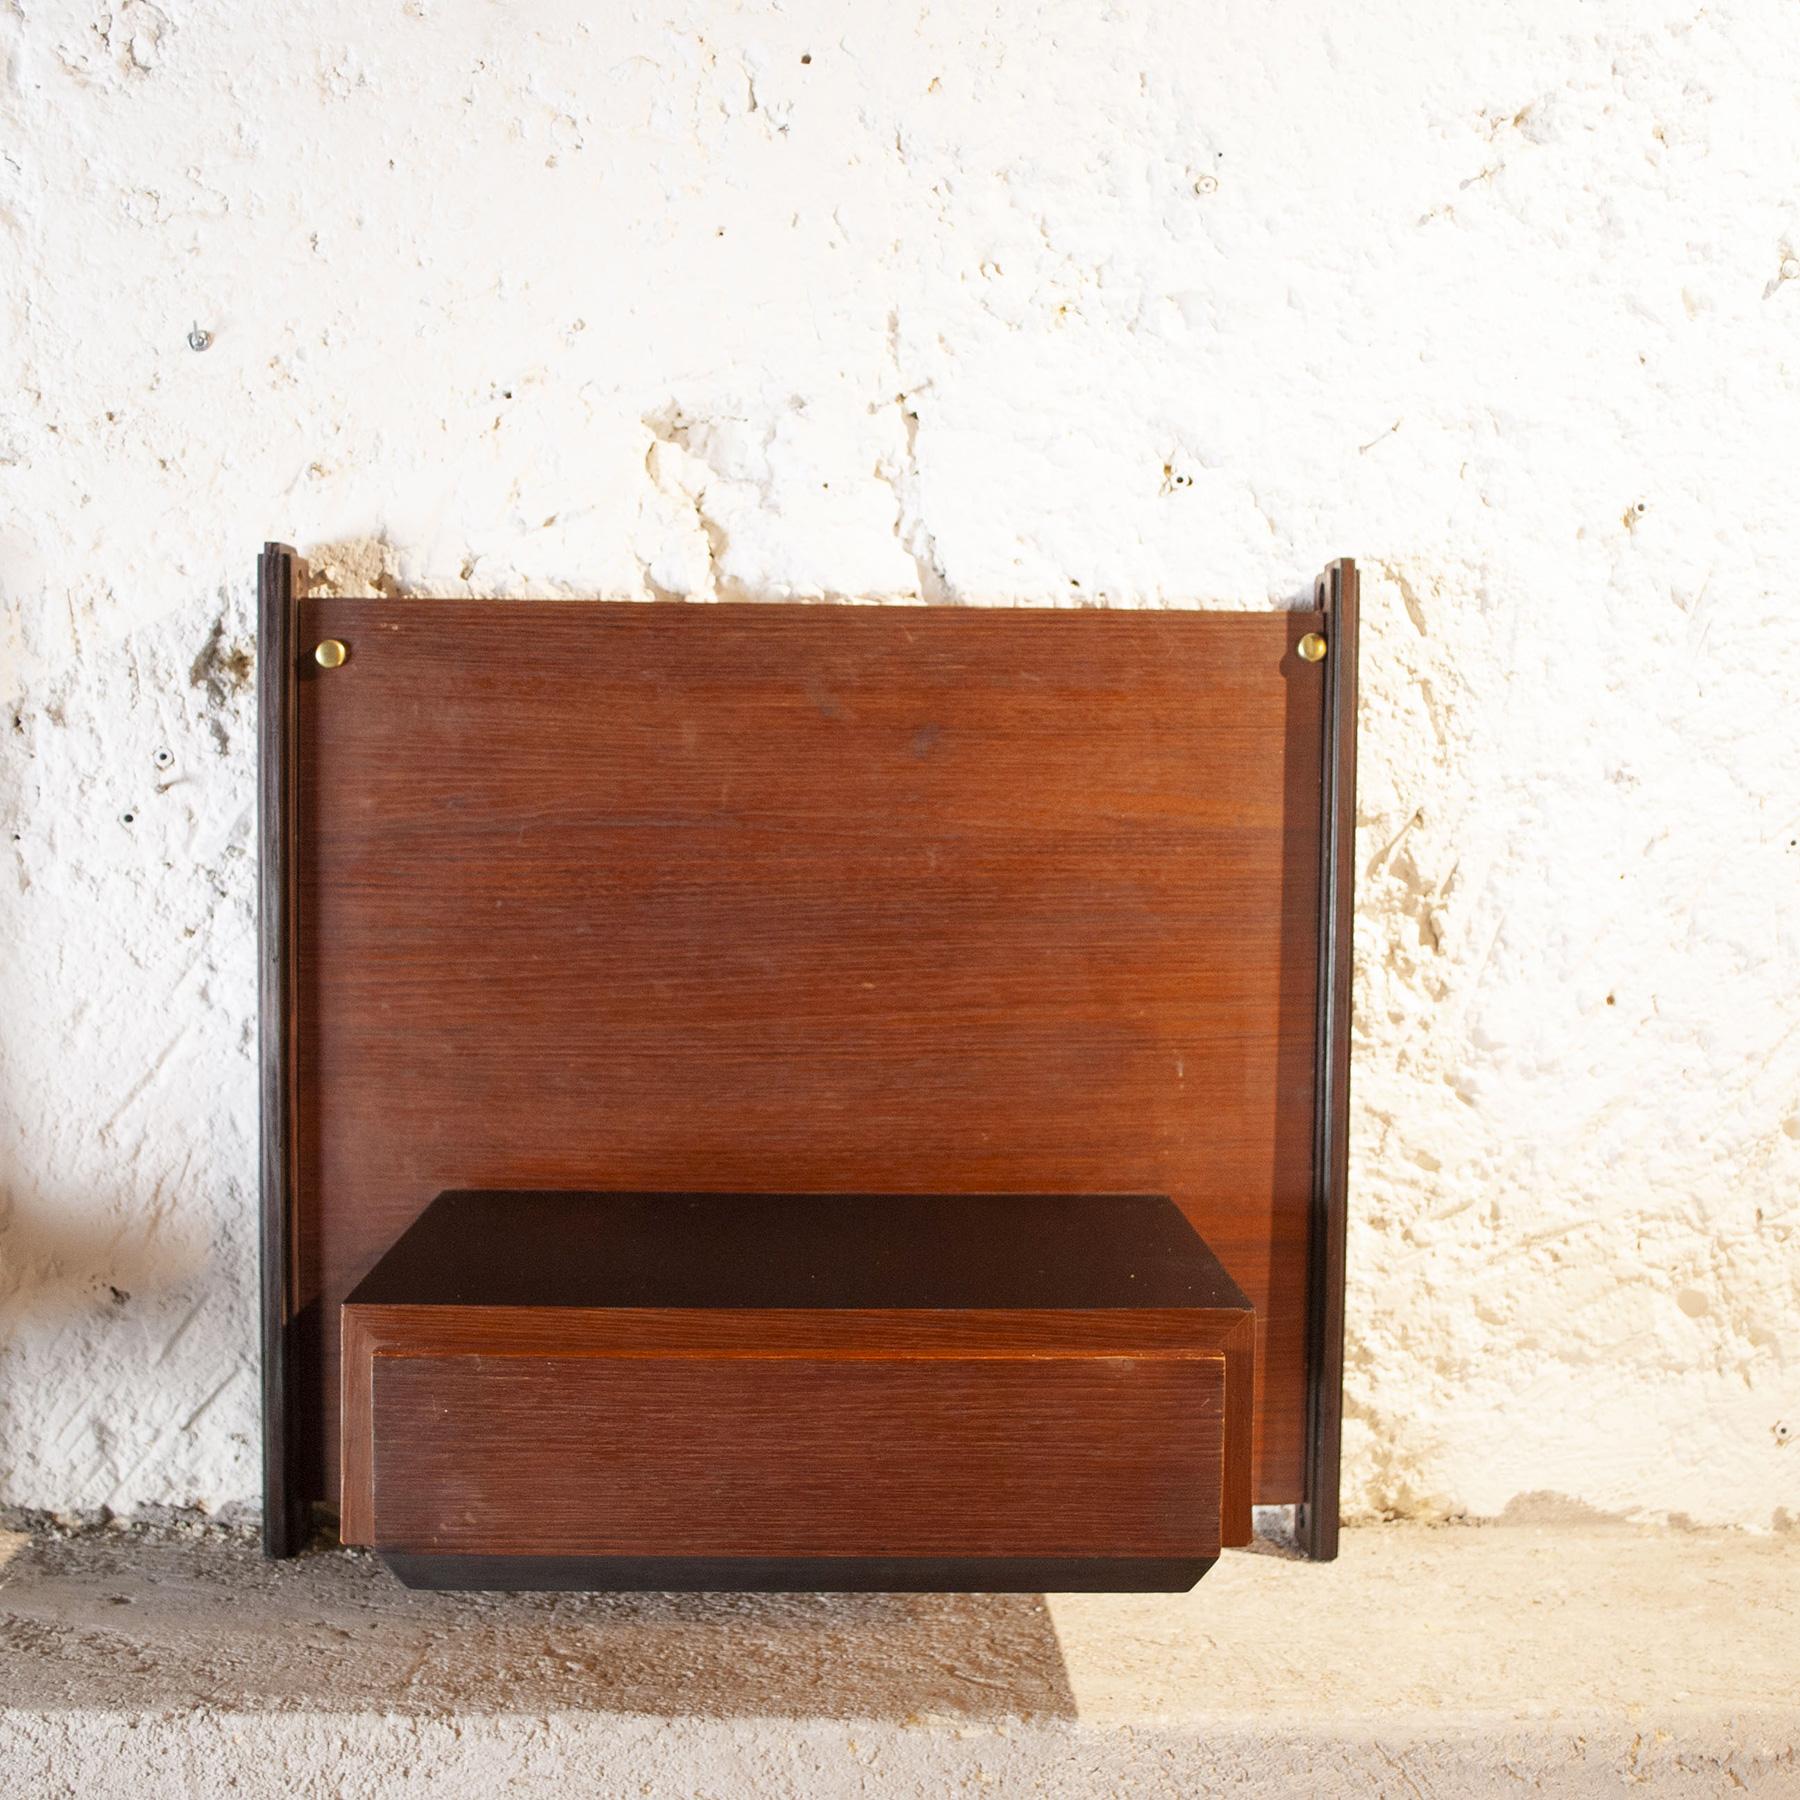 Teak Ico Parisi Set of Two Night Stands Late Sixties For Sale